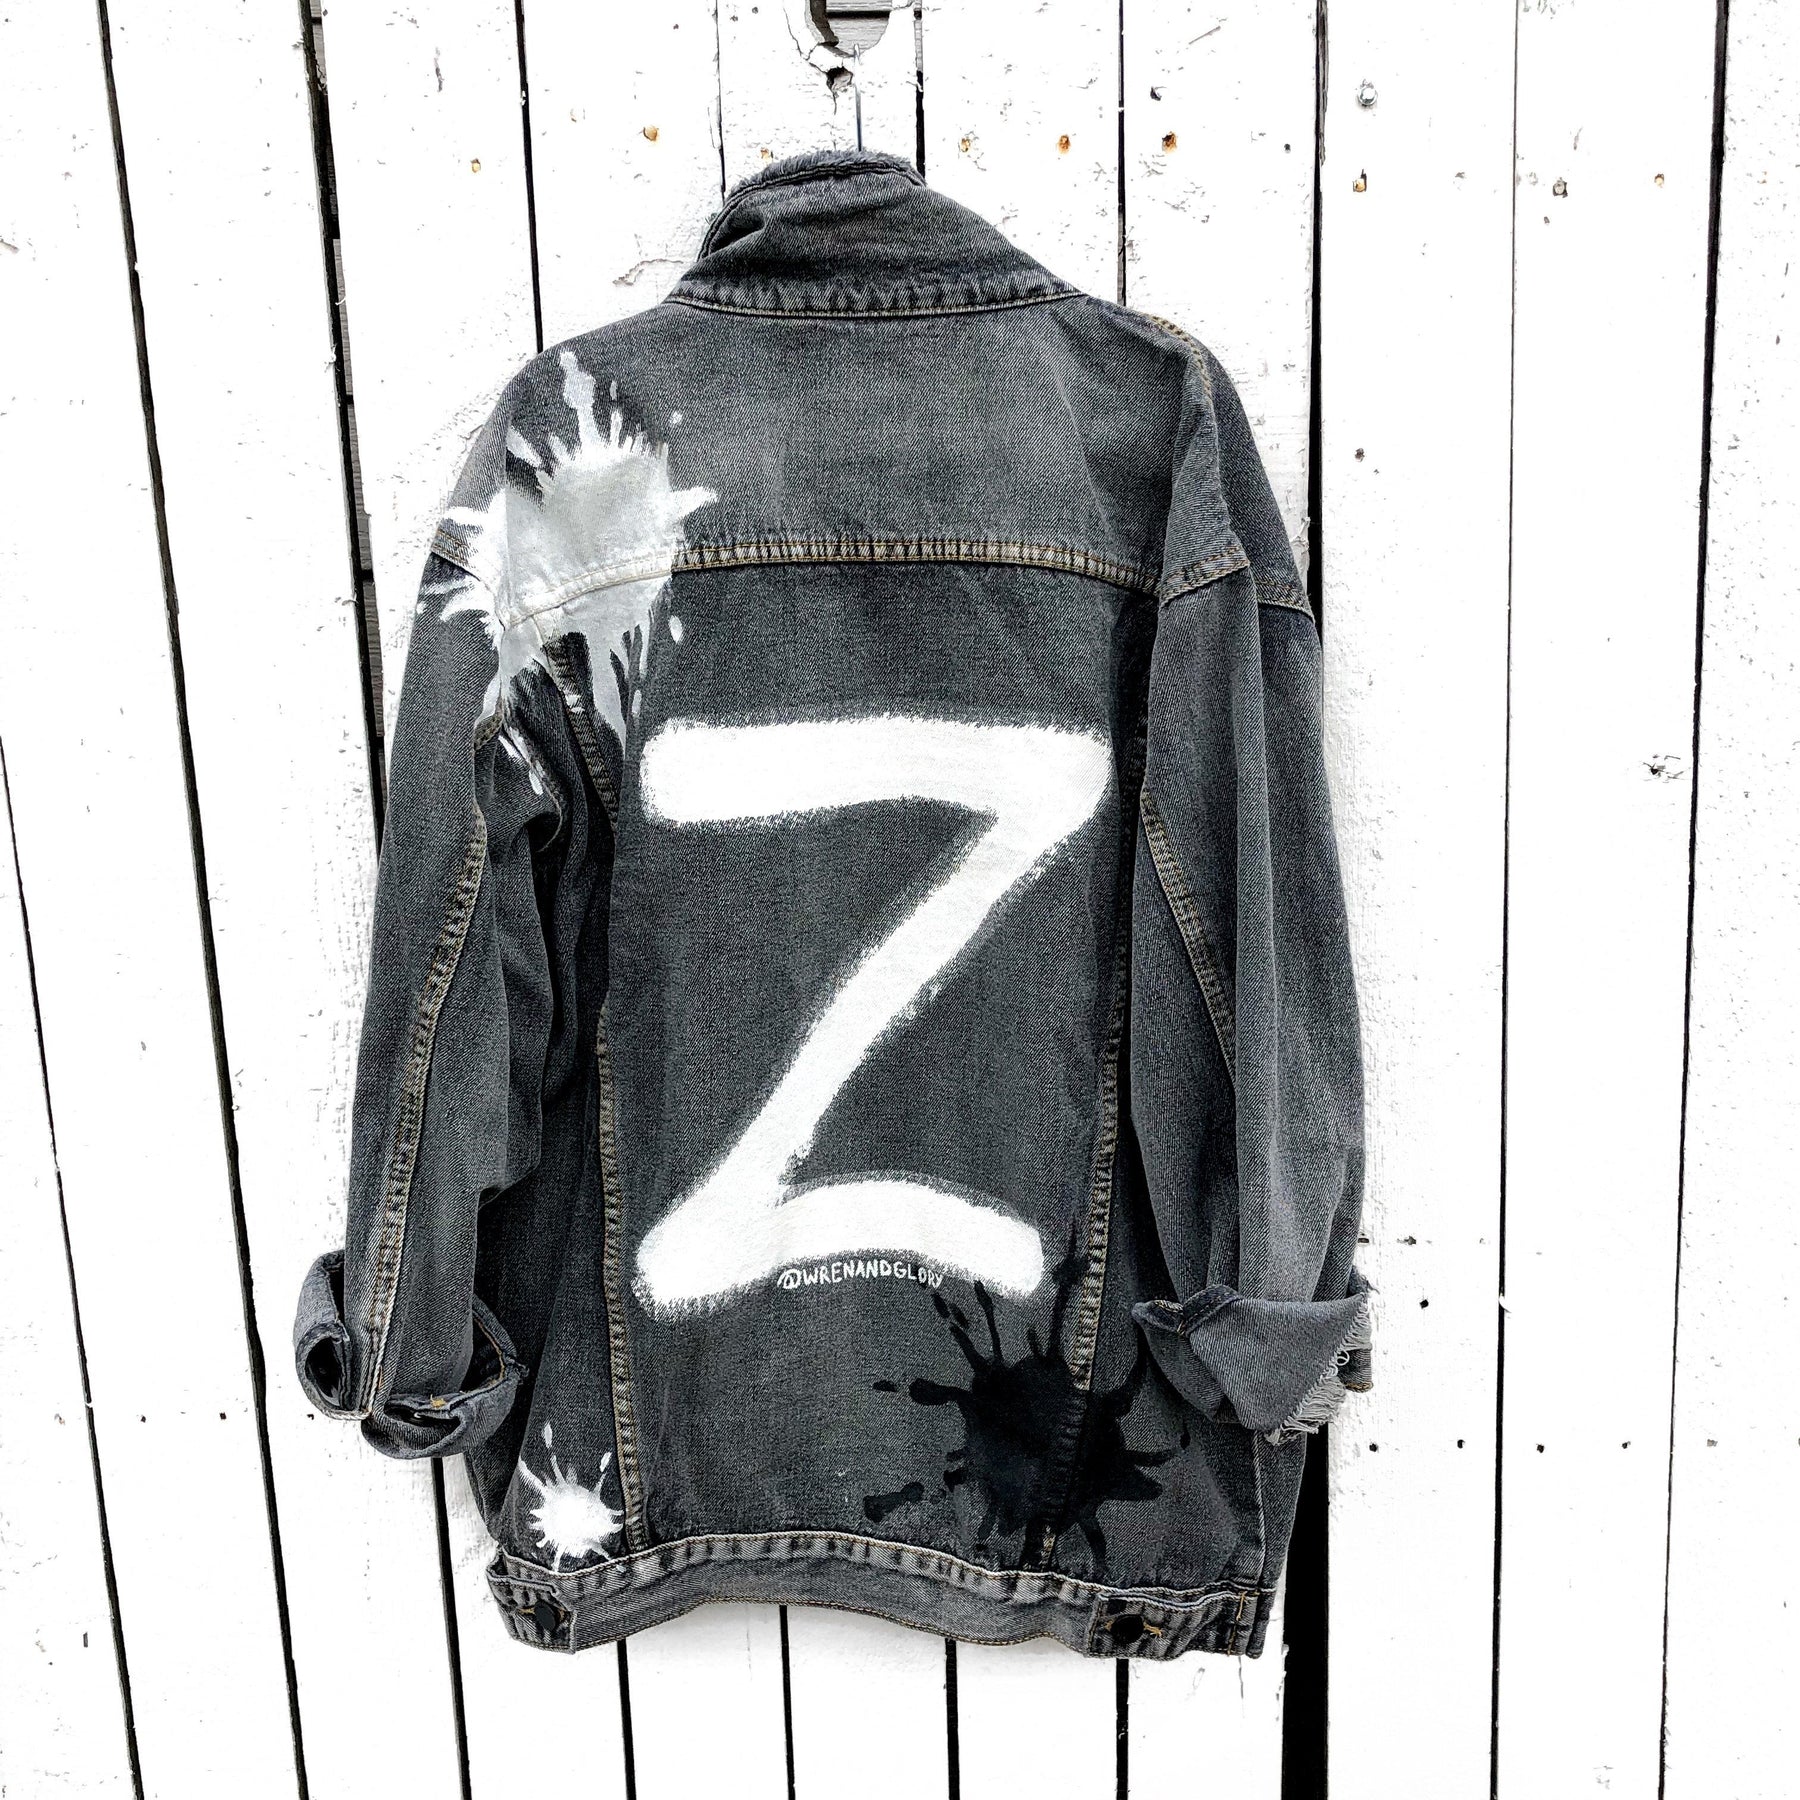 Faded black denim wash. Large white initial on back, with painted white and black 'splatters' 'Enjoy The Ride' painted in black and white down the arm. Signed @wrenandglory.